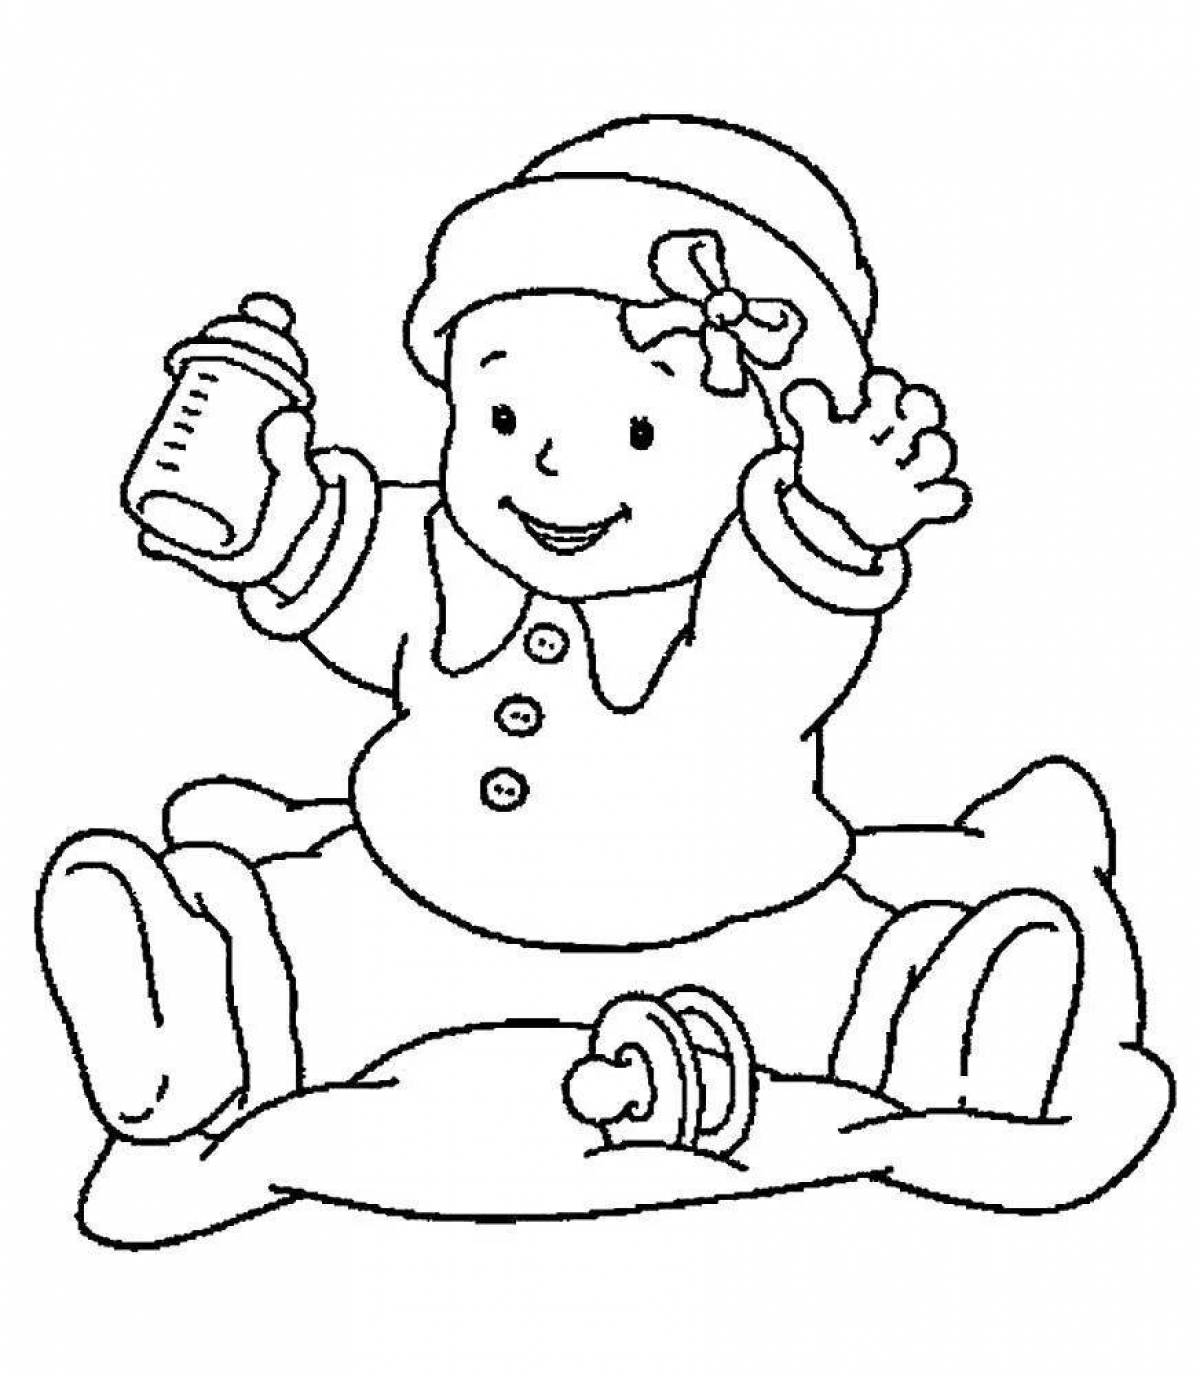 Joyful coloring pages for dolls